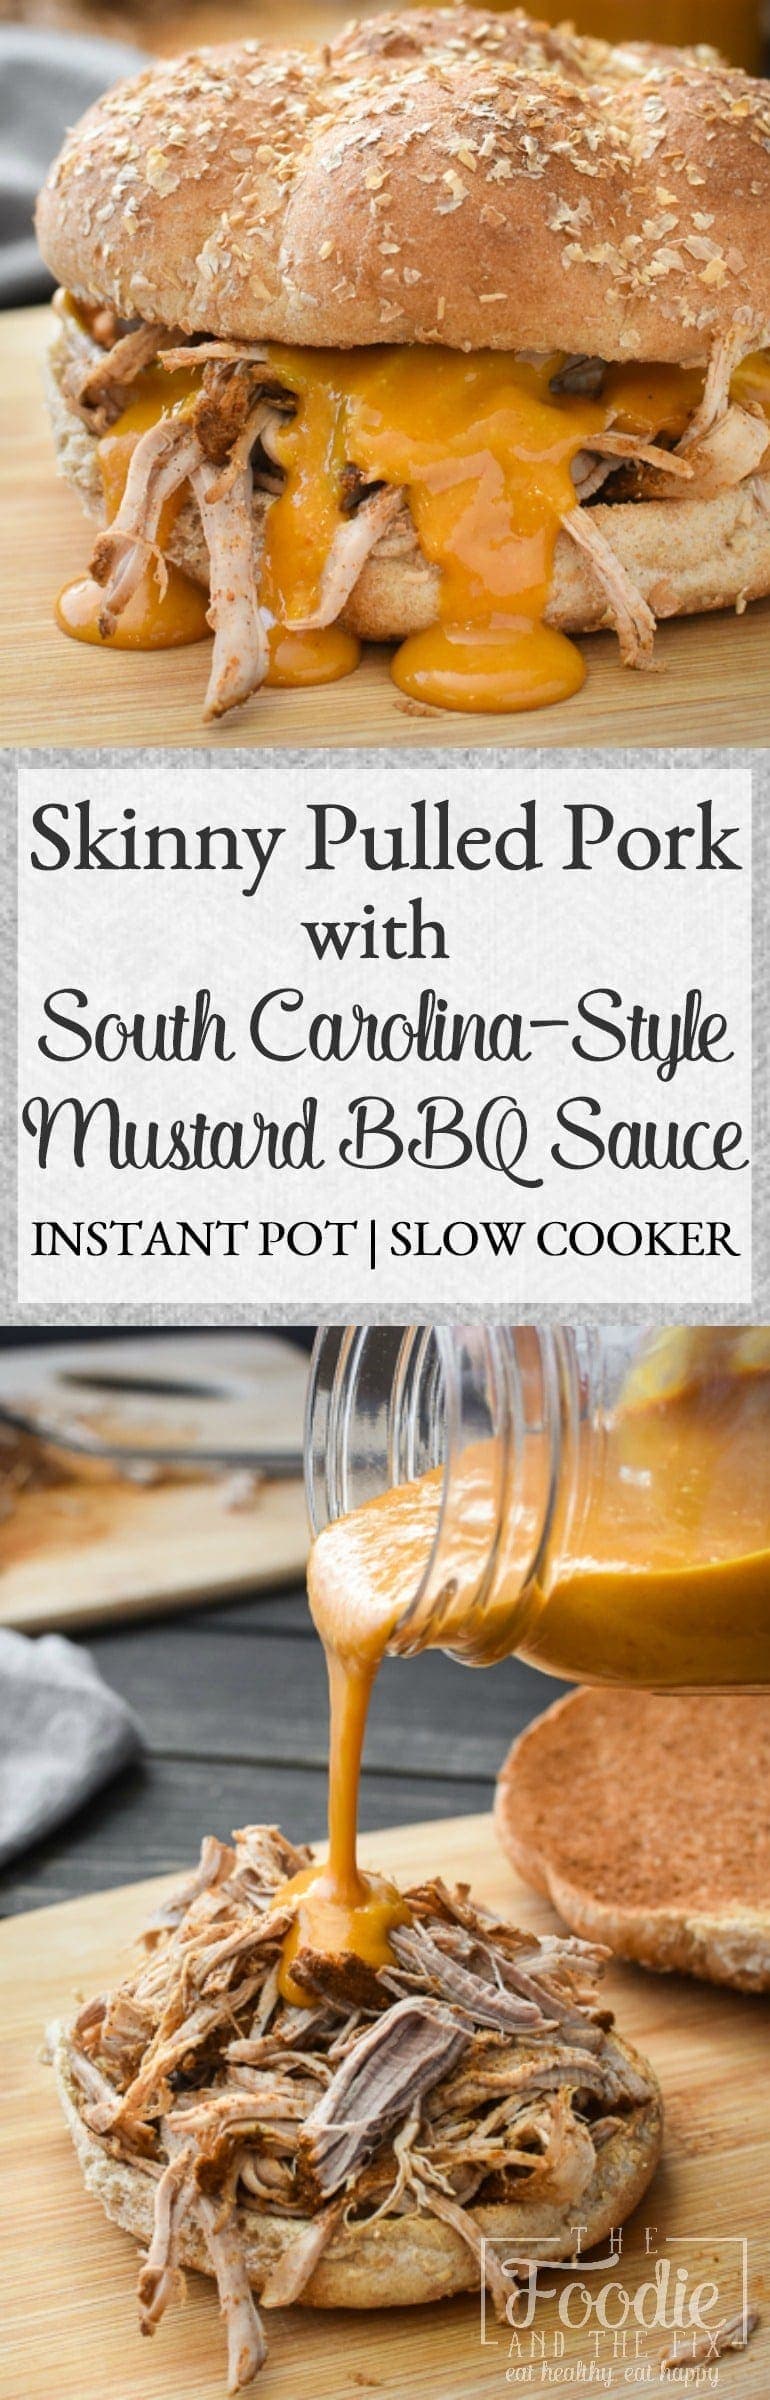 This healthy pulled pork with BBQ sauce is SO crazy delicious AND can be made in about an hour and a half from start to finish in the Instant Pot! It's such an easy, family-pleasing 21 Day Fix dinner! #bbq #picnic #easy #dinner #mealprep #weightloss #21dayfix #beachbody #lunch #instantpot #slowcooker #crockpot #healthy #healthydinner